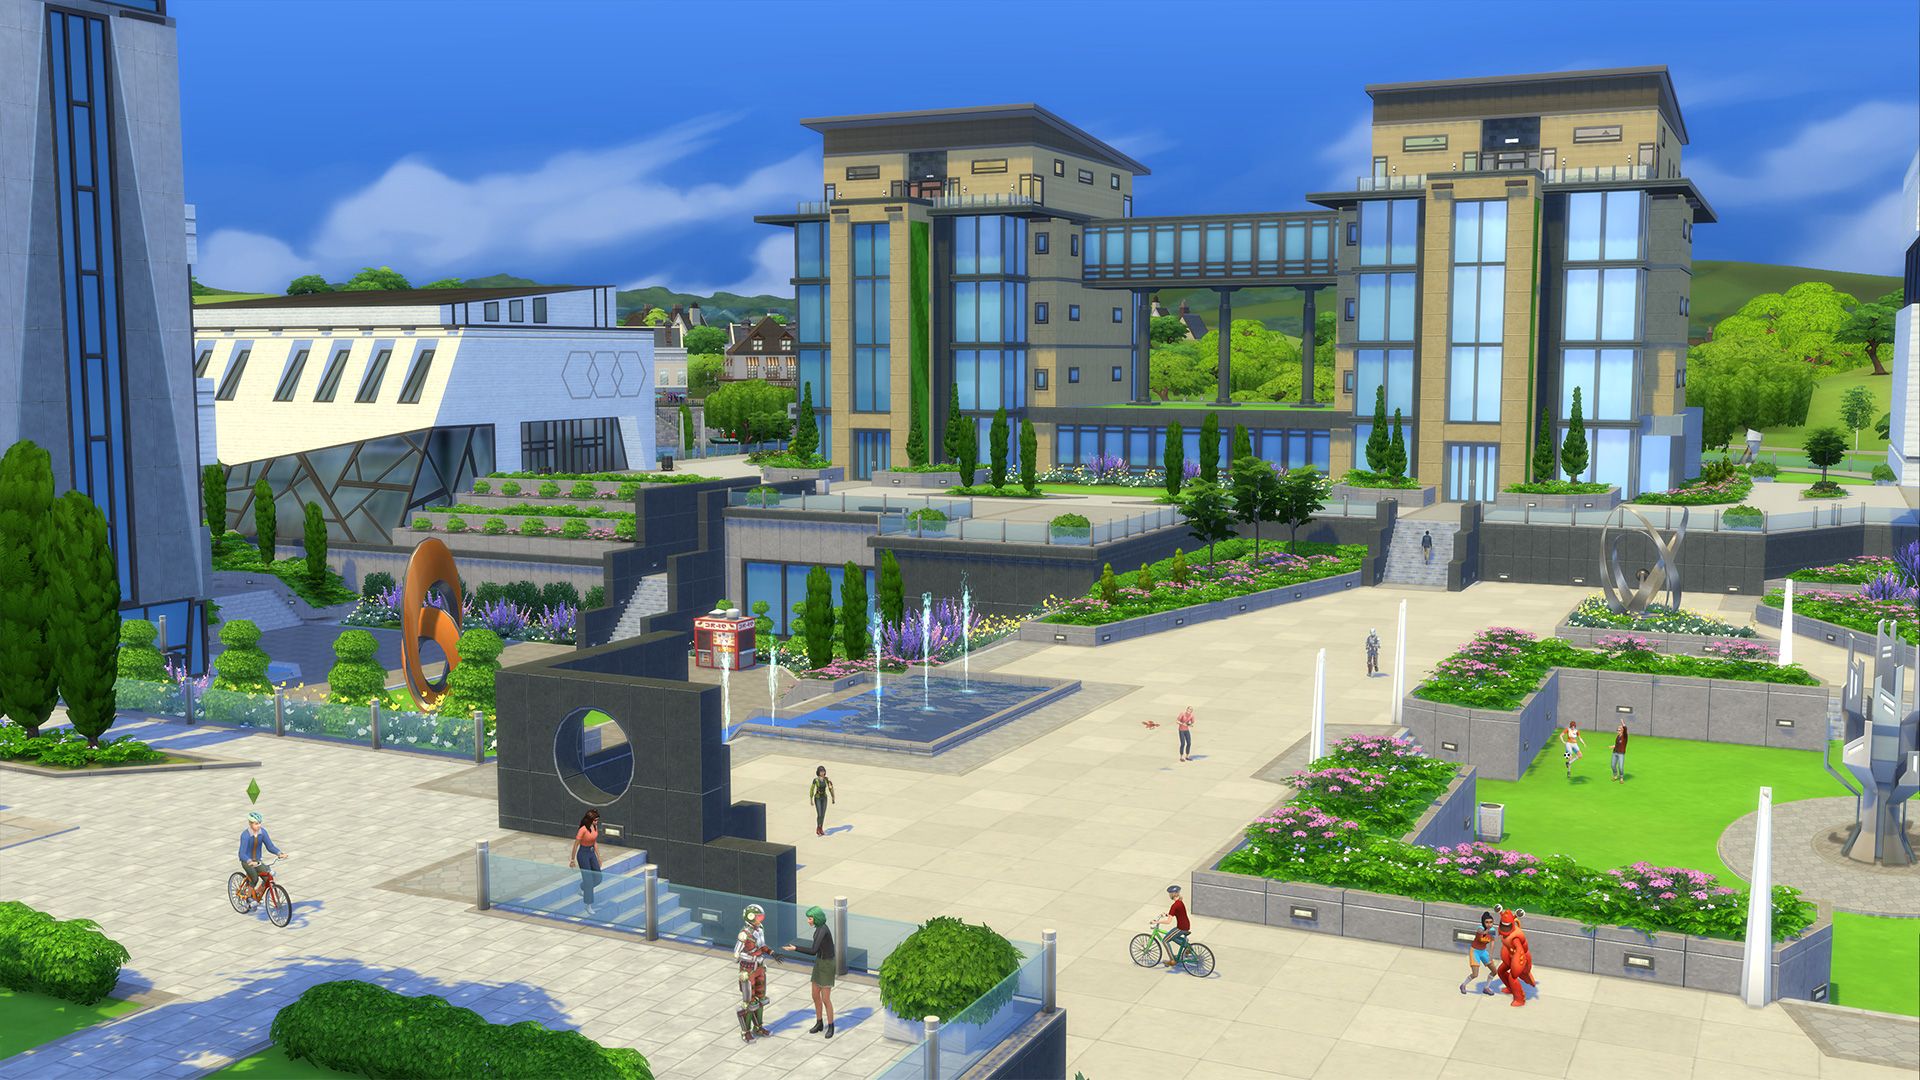 Sims 4 Discover University  10 Confirmed Things From the Trailer